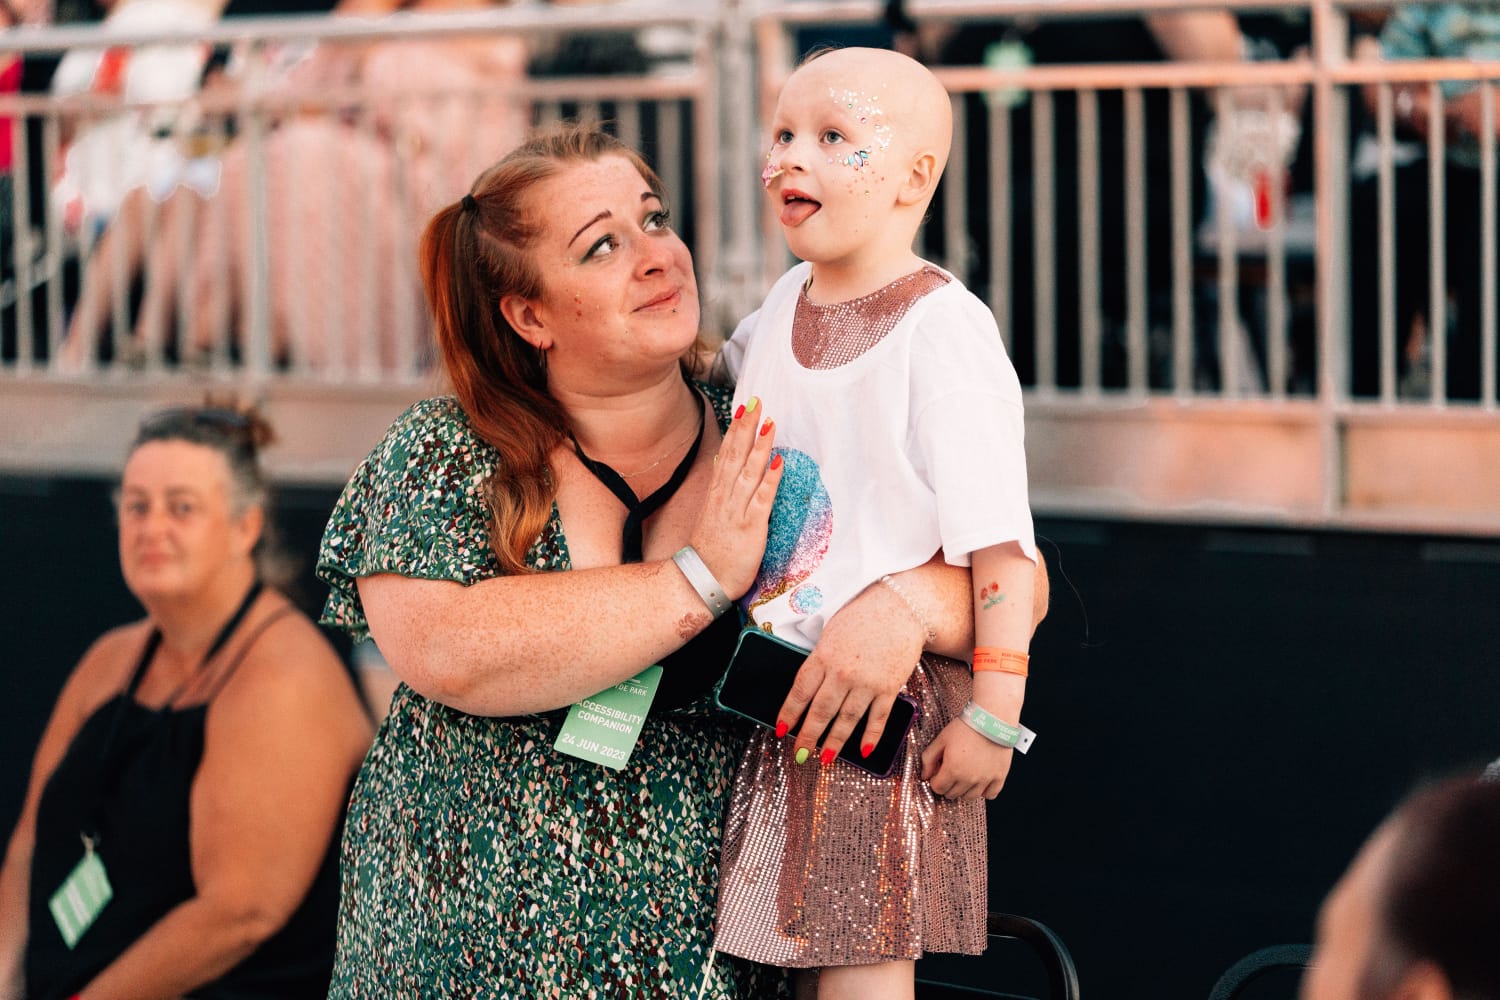 Little girl and her mum in the audience of a concert. The little girl is wearing a white t-shirt over a sparkly dress, and has no hair. The mum is wearing a green floral dress and gazing lovingly at her daughter.